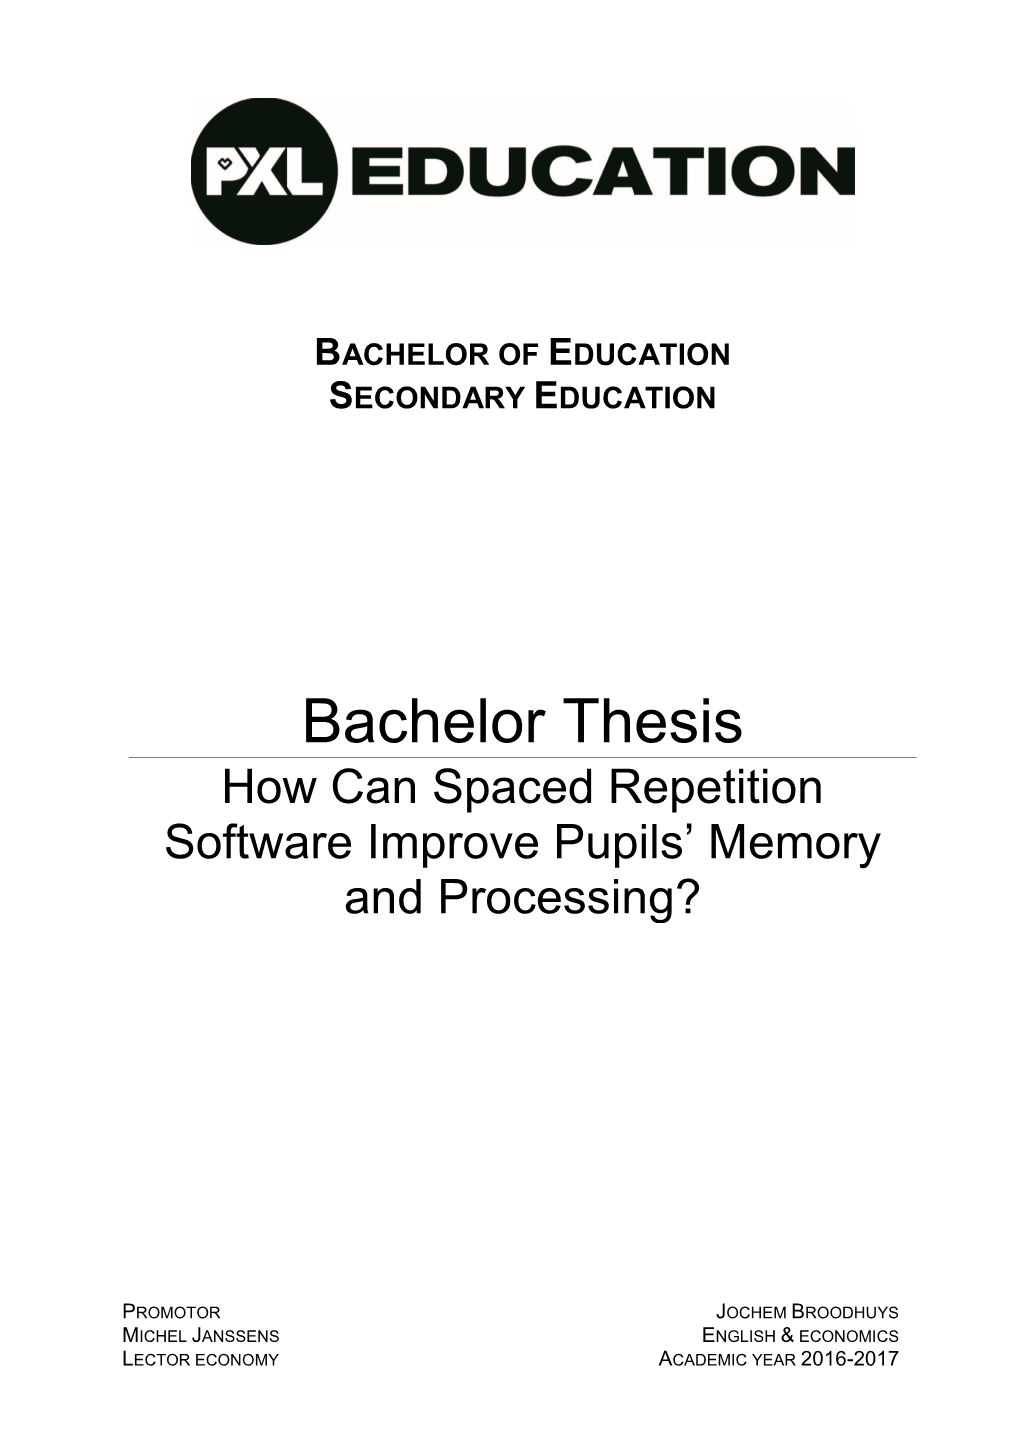 Bachelor Thesis How Can Spaced Repetition Software Improve Pupils’ Memory and Processing?